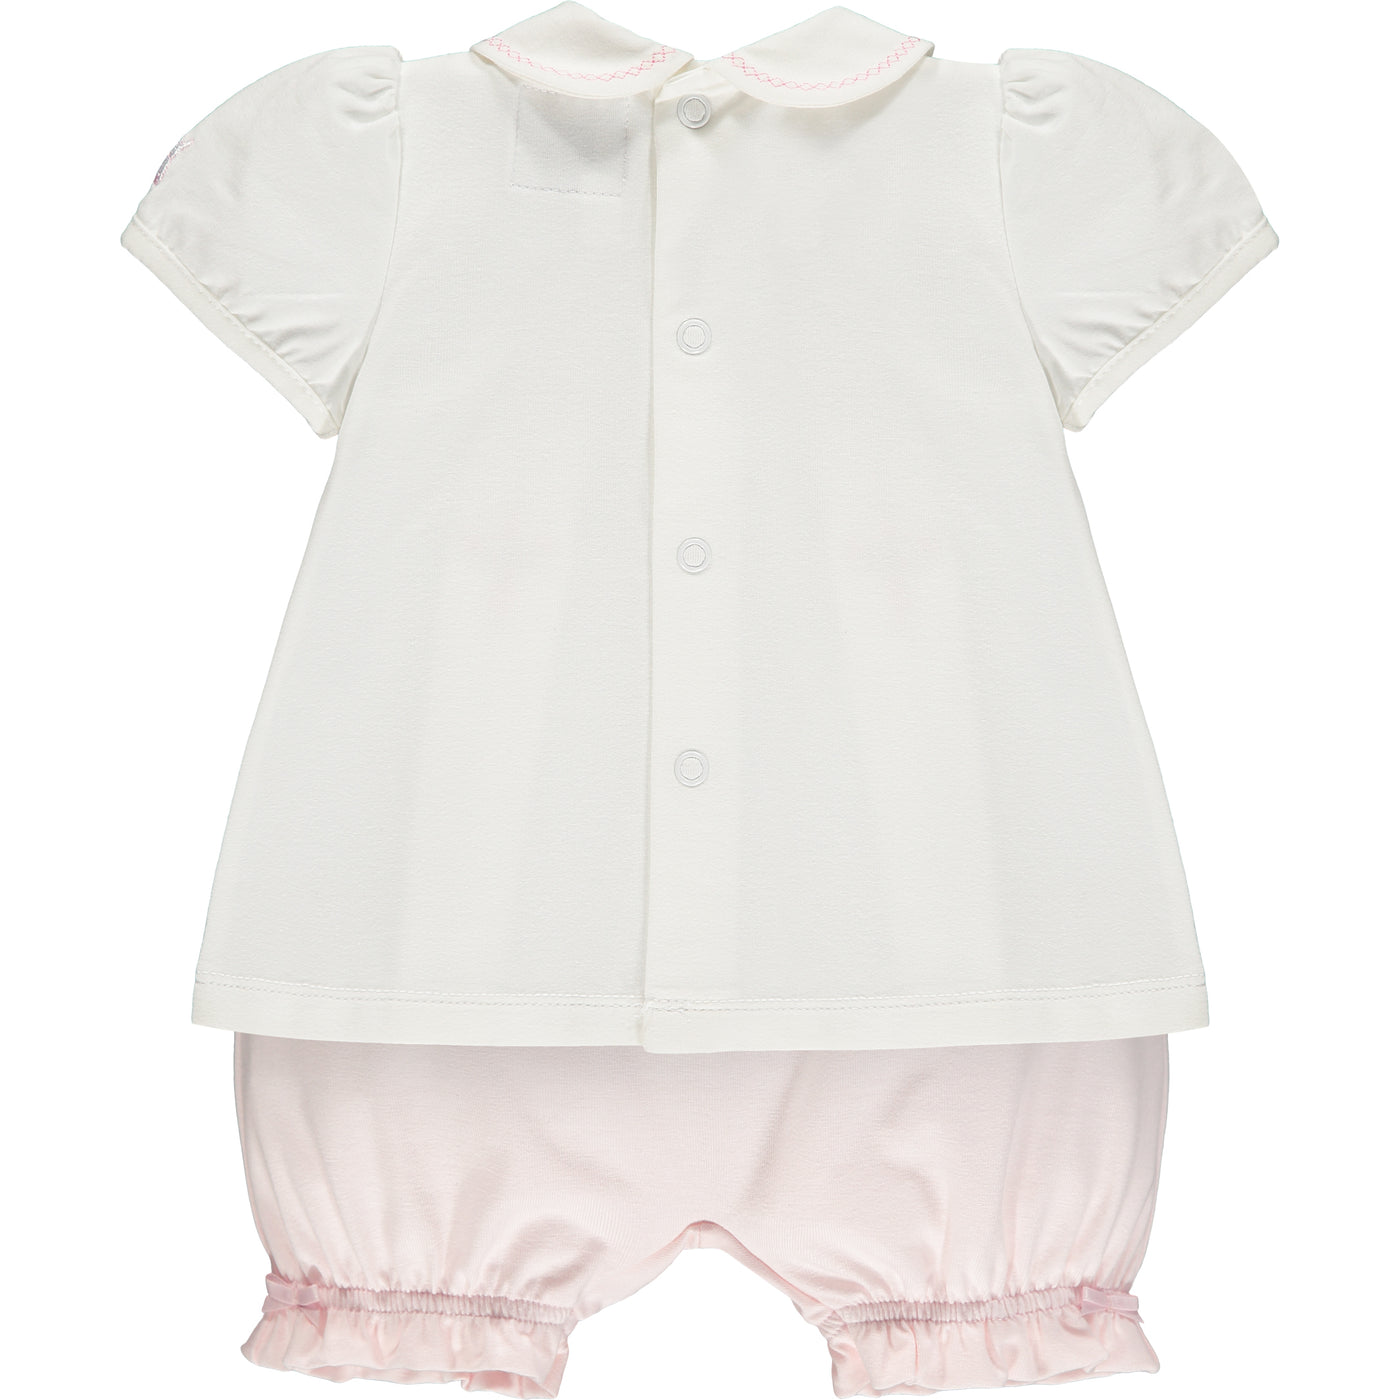 Blossom Top & Bloomers Set